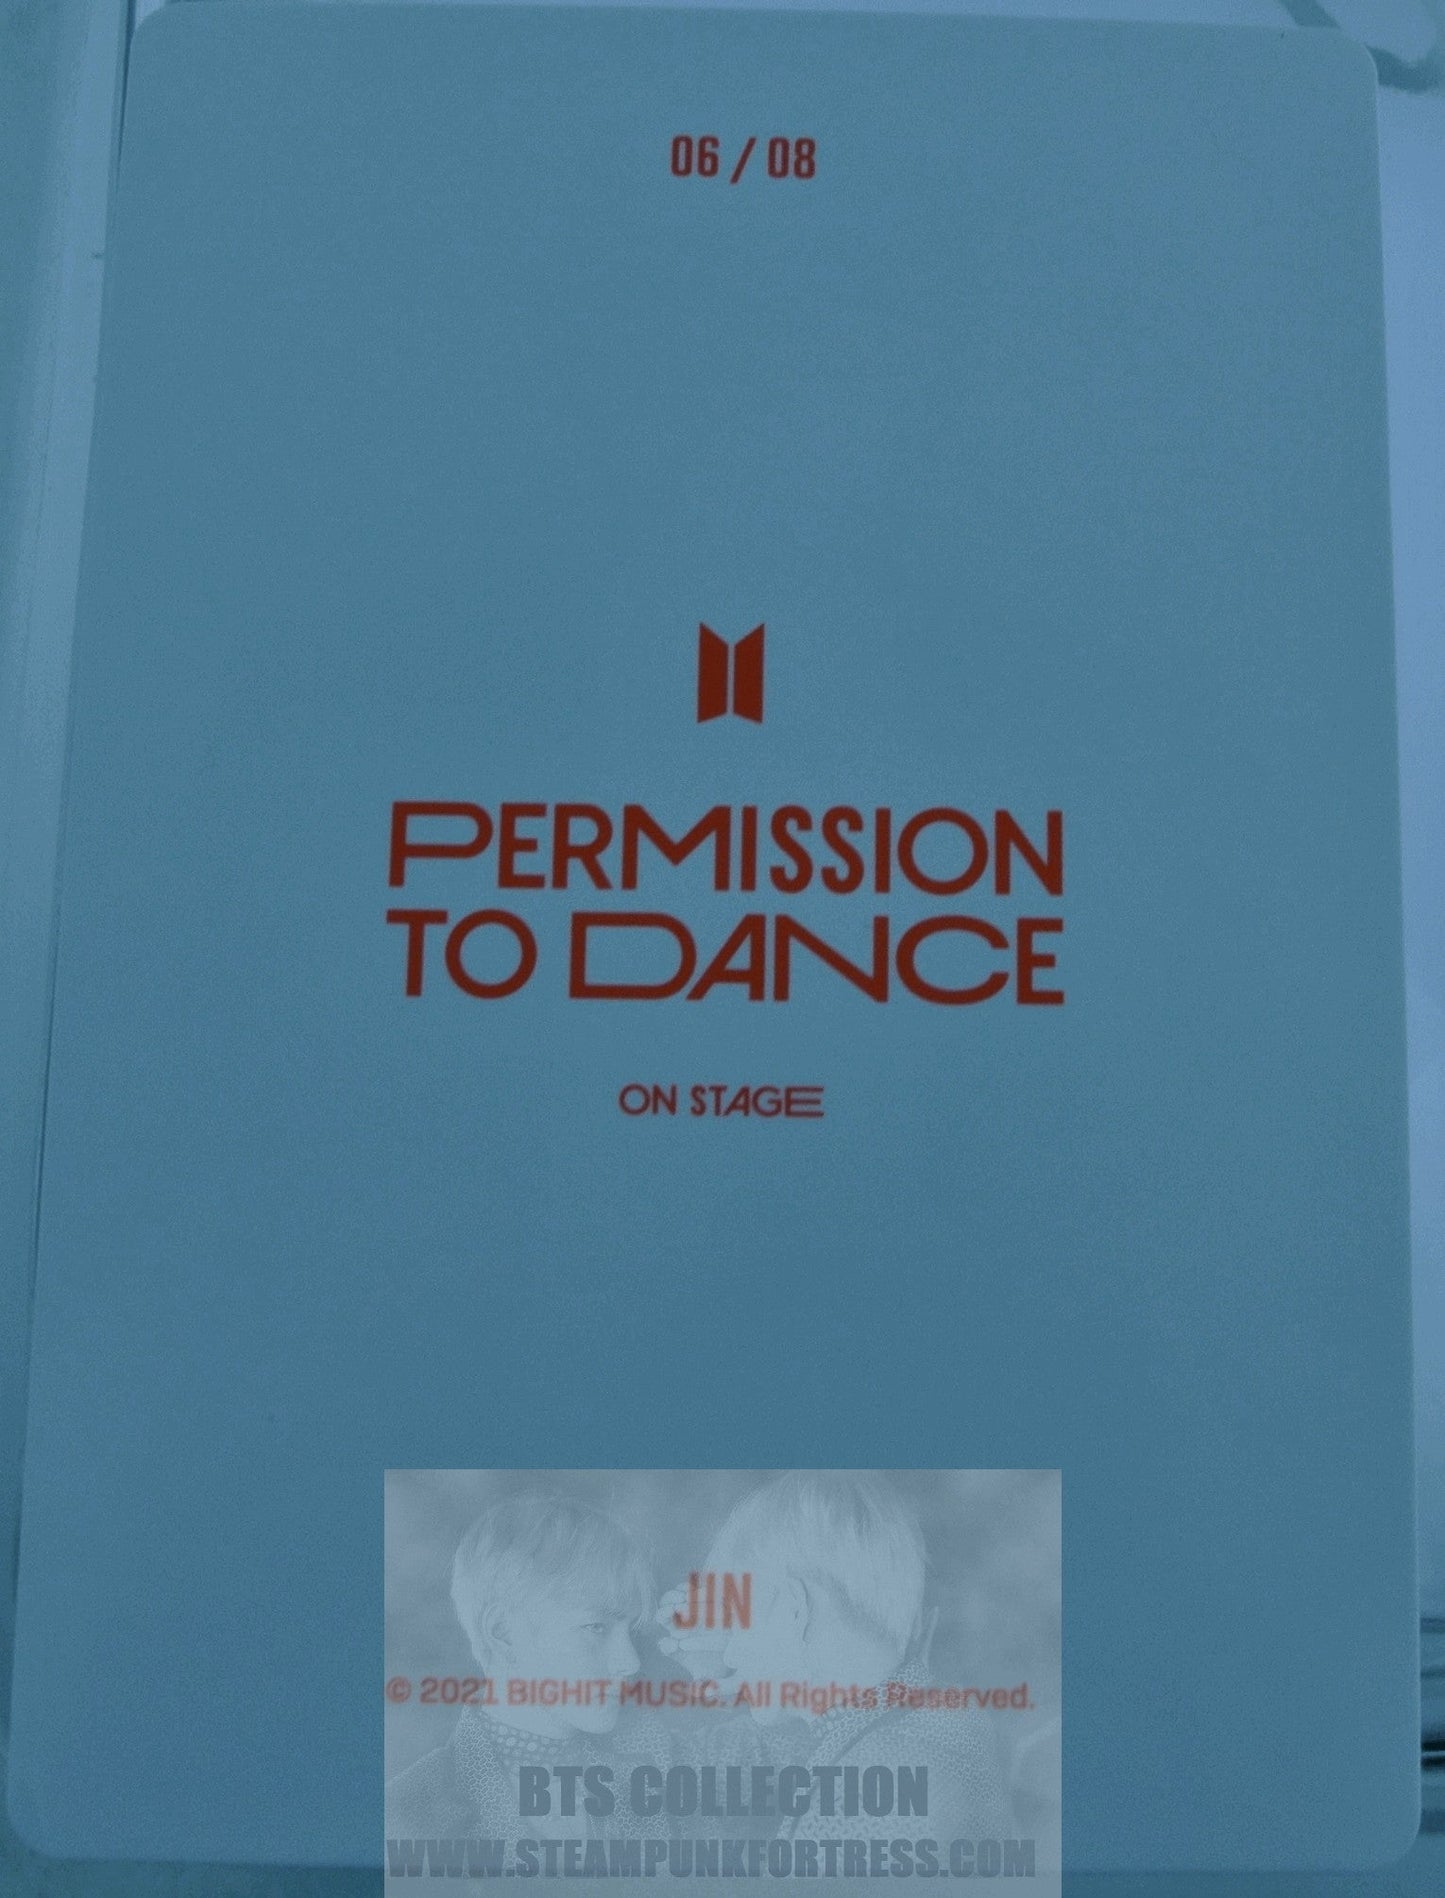 BTS JIN KIM SEOKJIN SEOK-JIN PTD 2021 PERMISSION TO DANCE ON STAGE #6 OF 8 PHOTOCARD PHOTO CARD NEW OFFICIAL MERCHANDISE